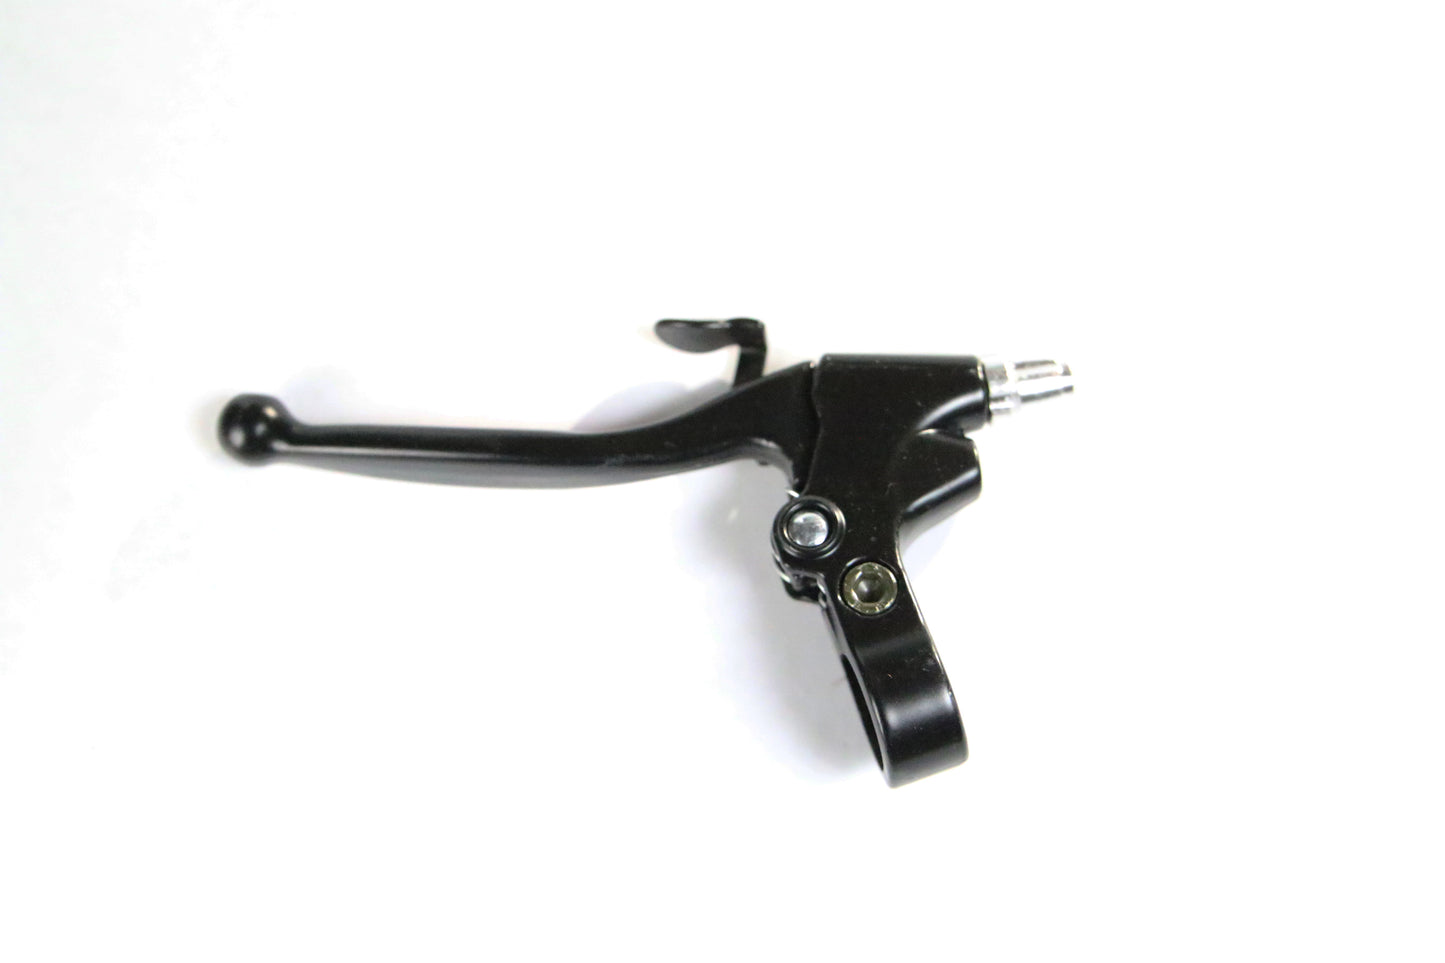 Clutch Lever Replacement for Motorized Bicycle